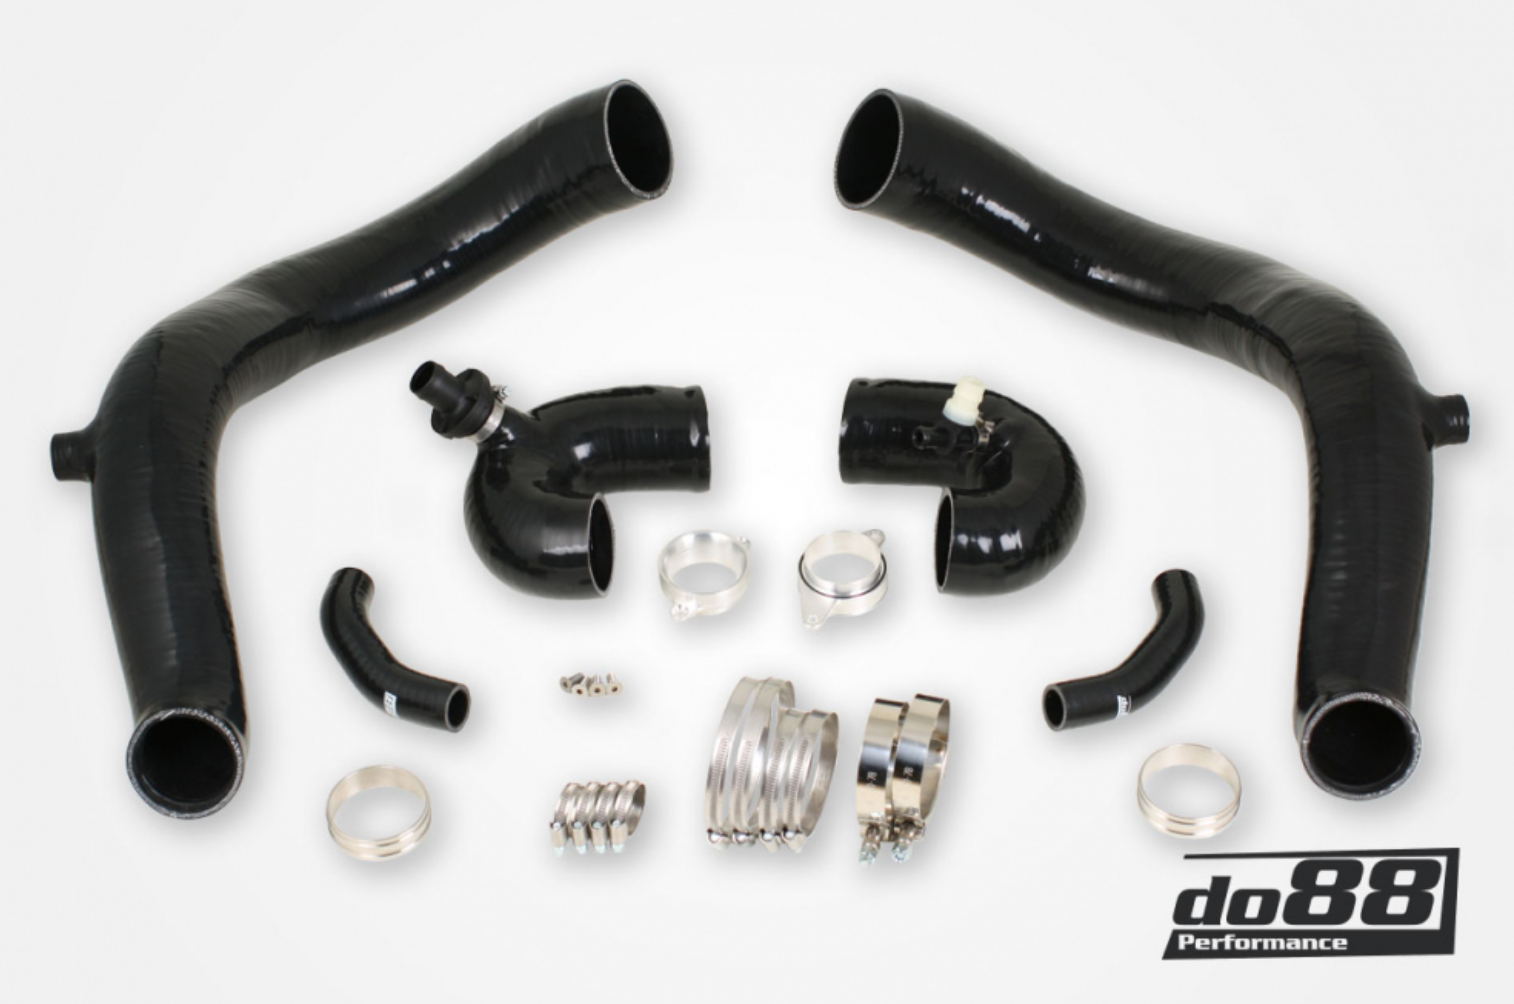 Engine - Intake/Fuel - Do88 Inlet Pipes, Intercooler Kits and Plenums for 996/997/991 Turbos - New - Middlesex, NJ 7001, United States